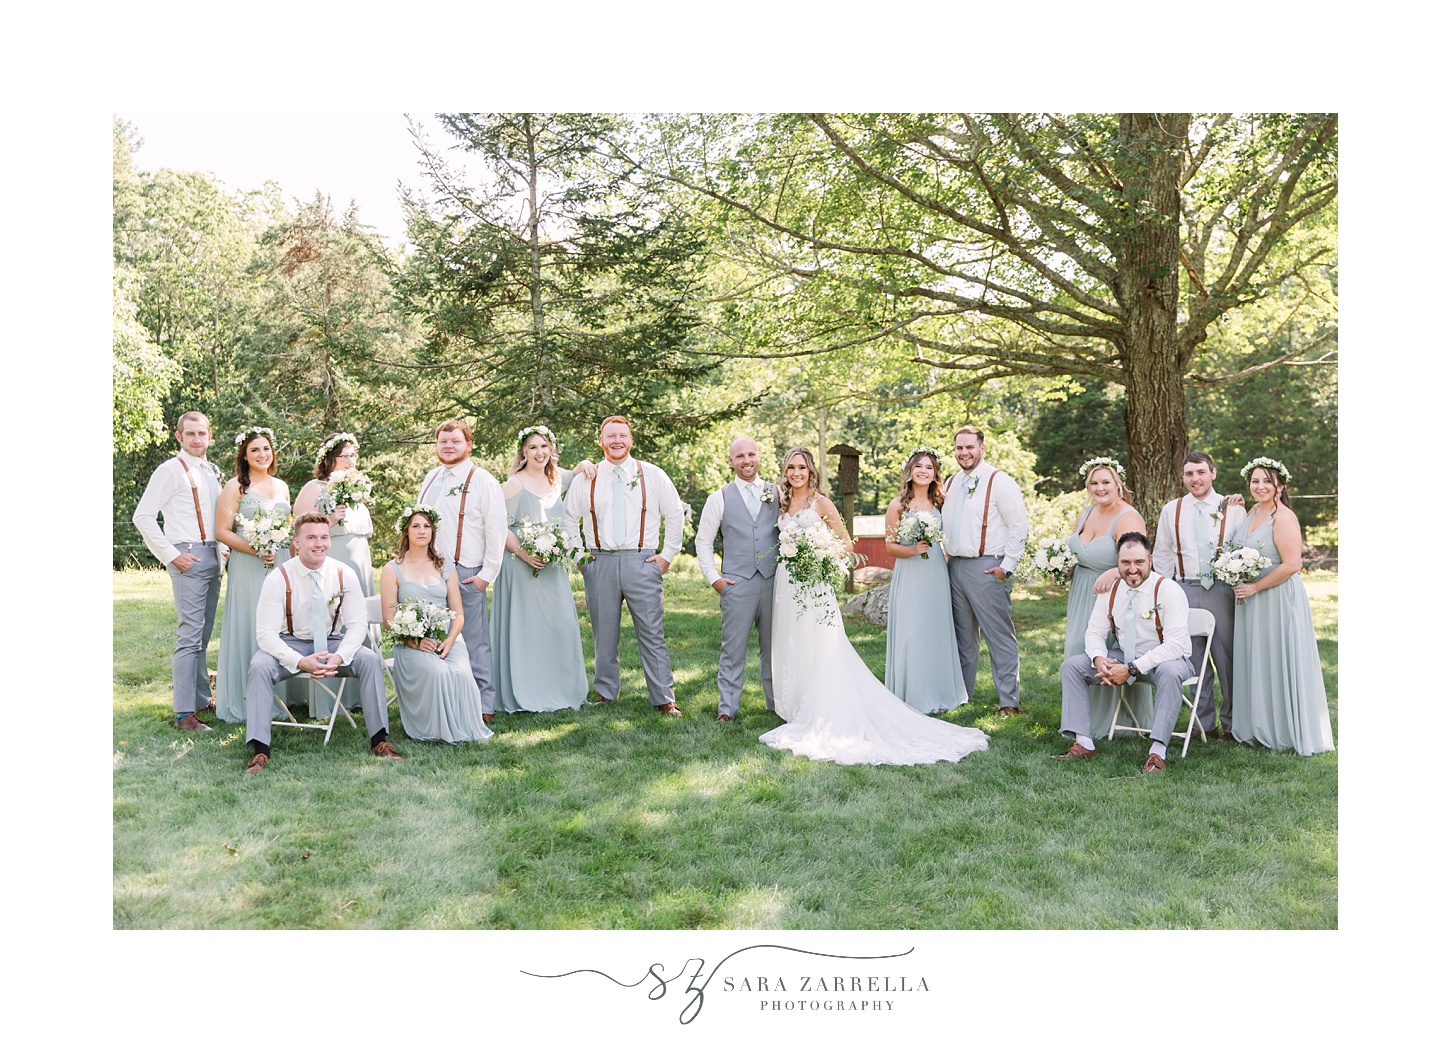 couple poses with wedding party during whimsical garden wedding